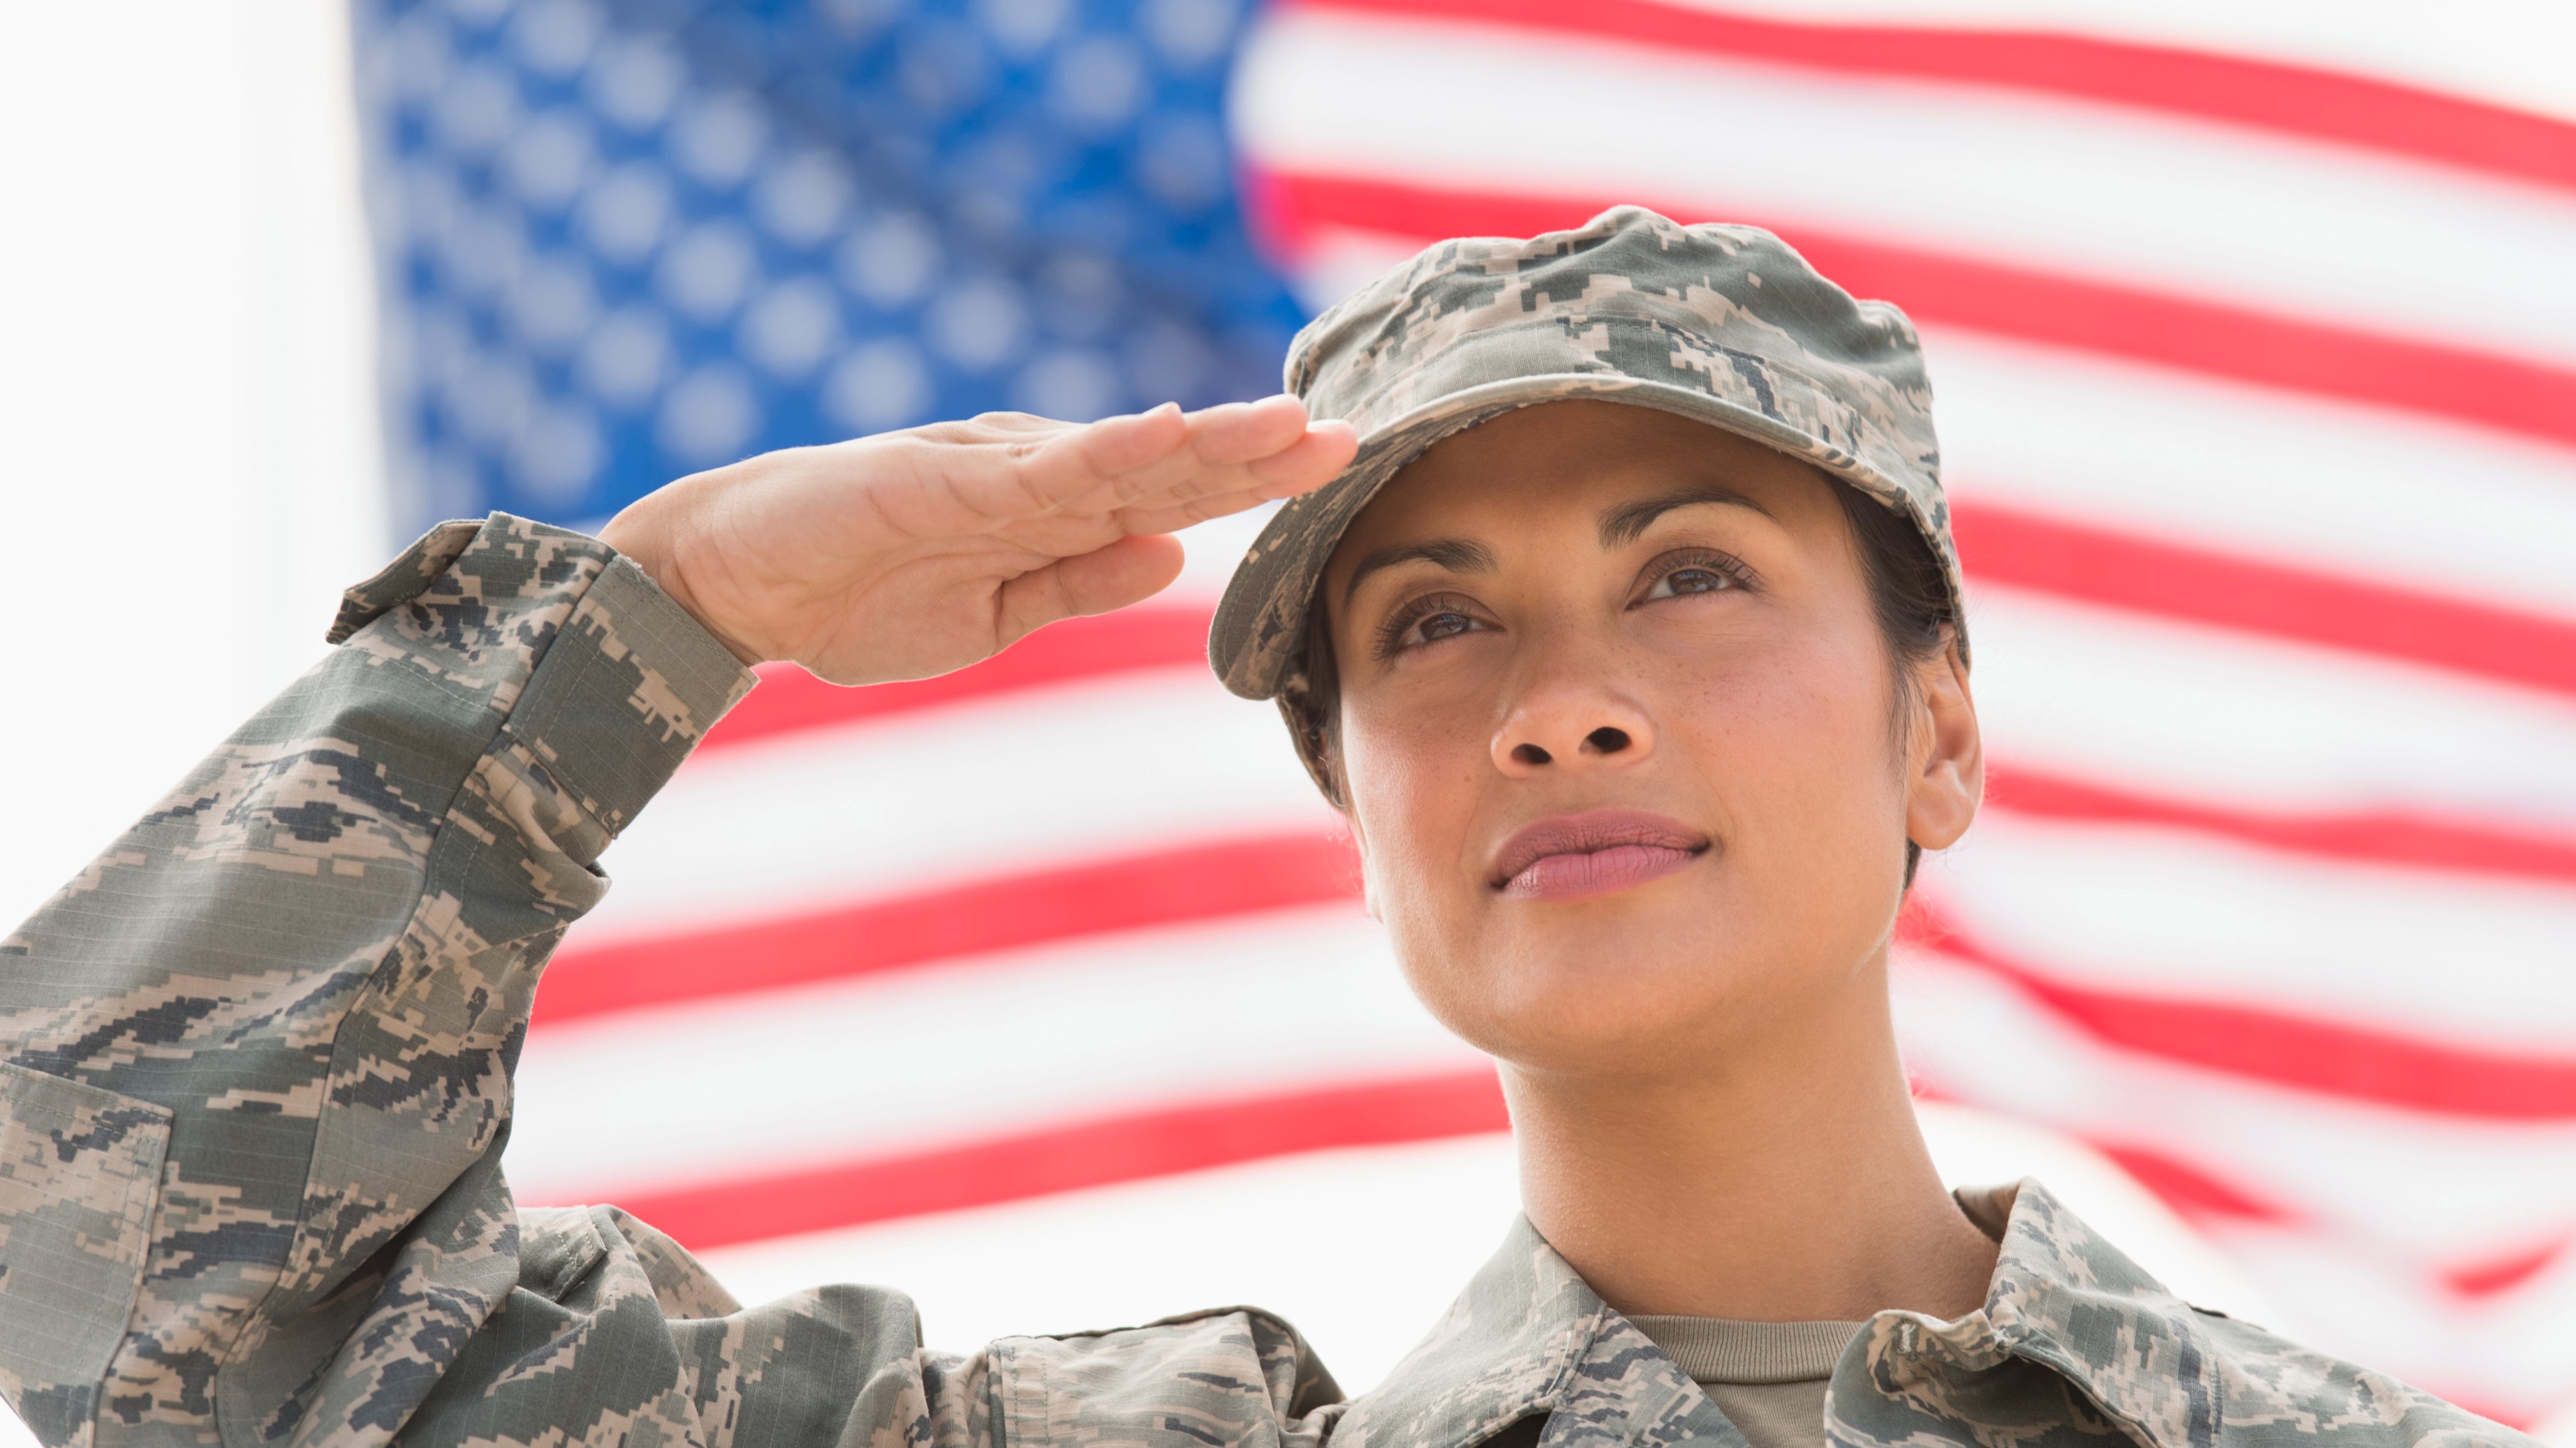 USA, New Jersey, Jersey City, Female army soldier saluting, American flag in background